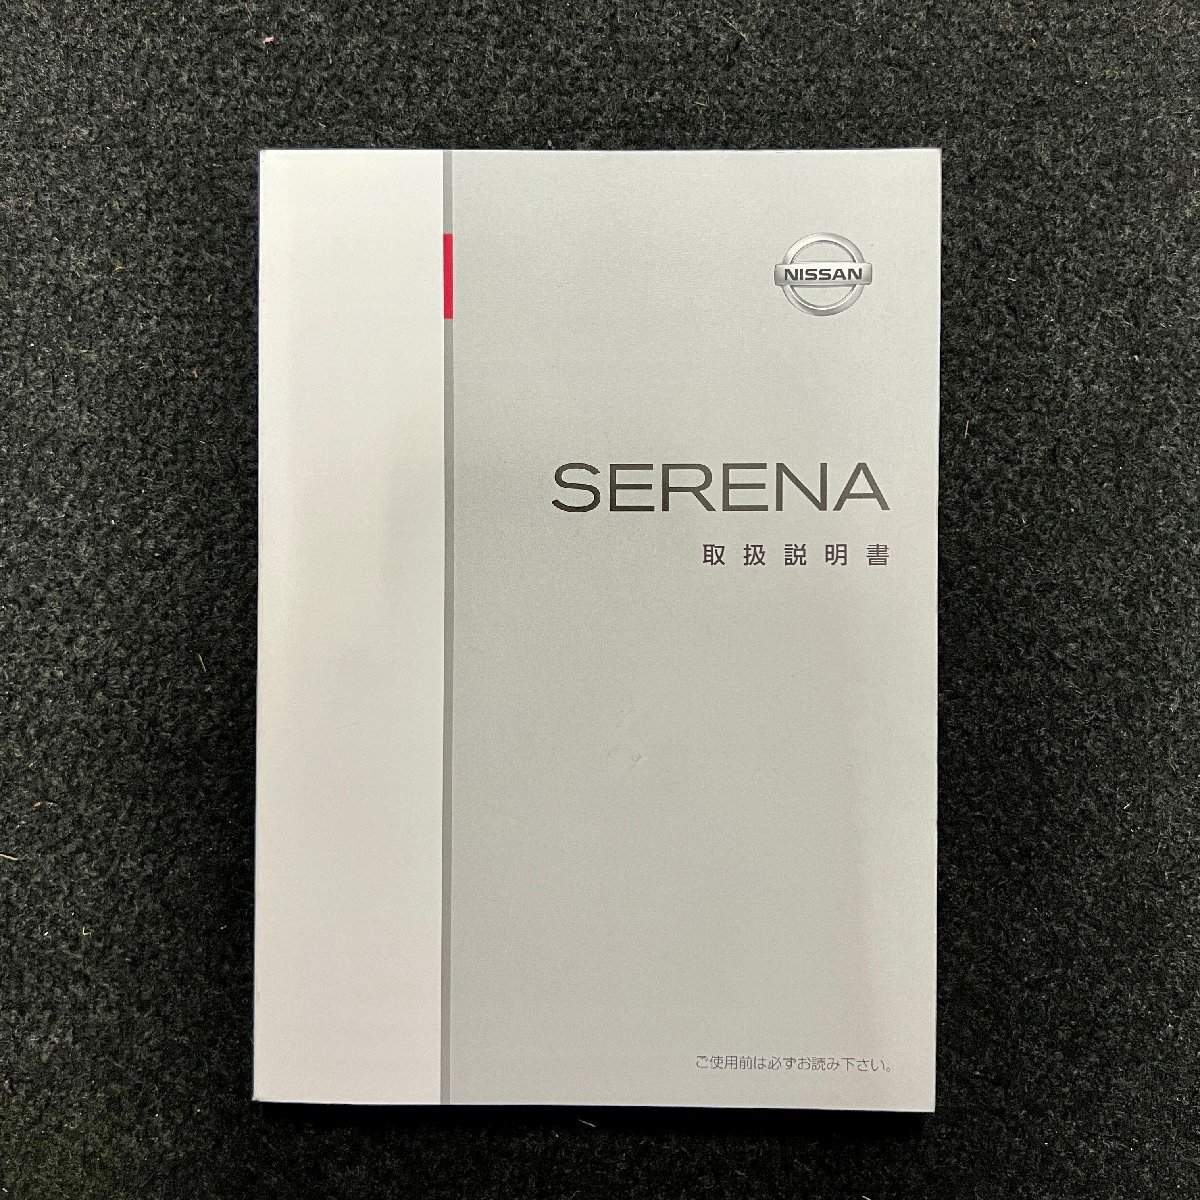  owner manual Serena C26 T00UM-1VA0A 2010 year 11 month 2011 year 07 month 